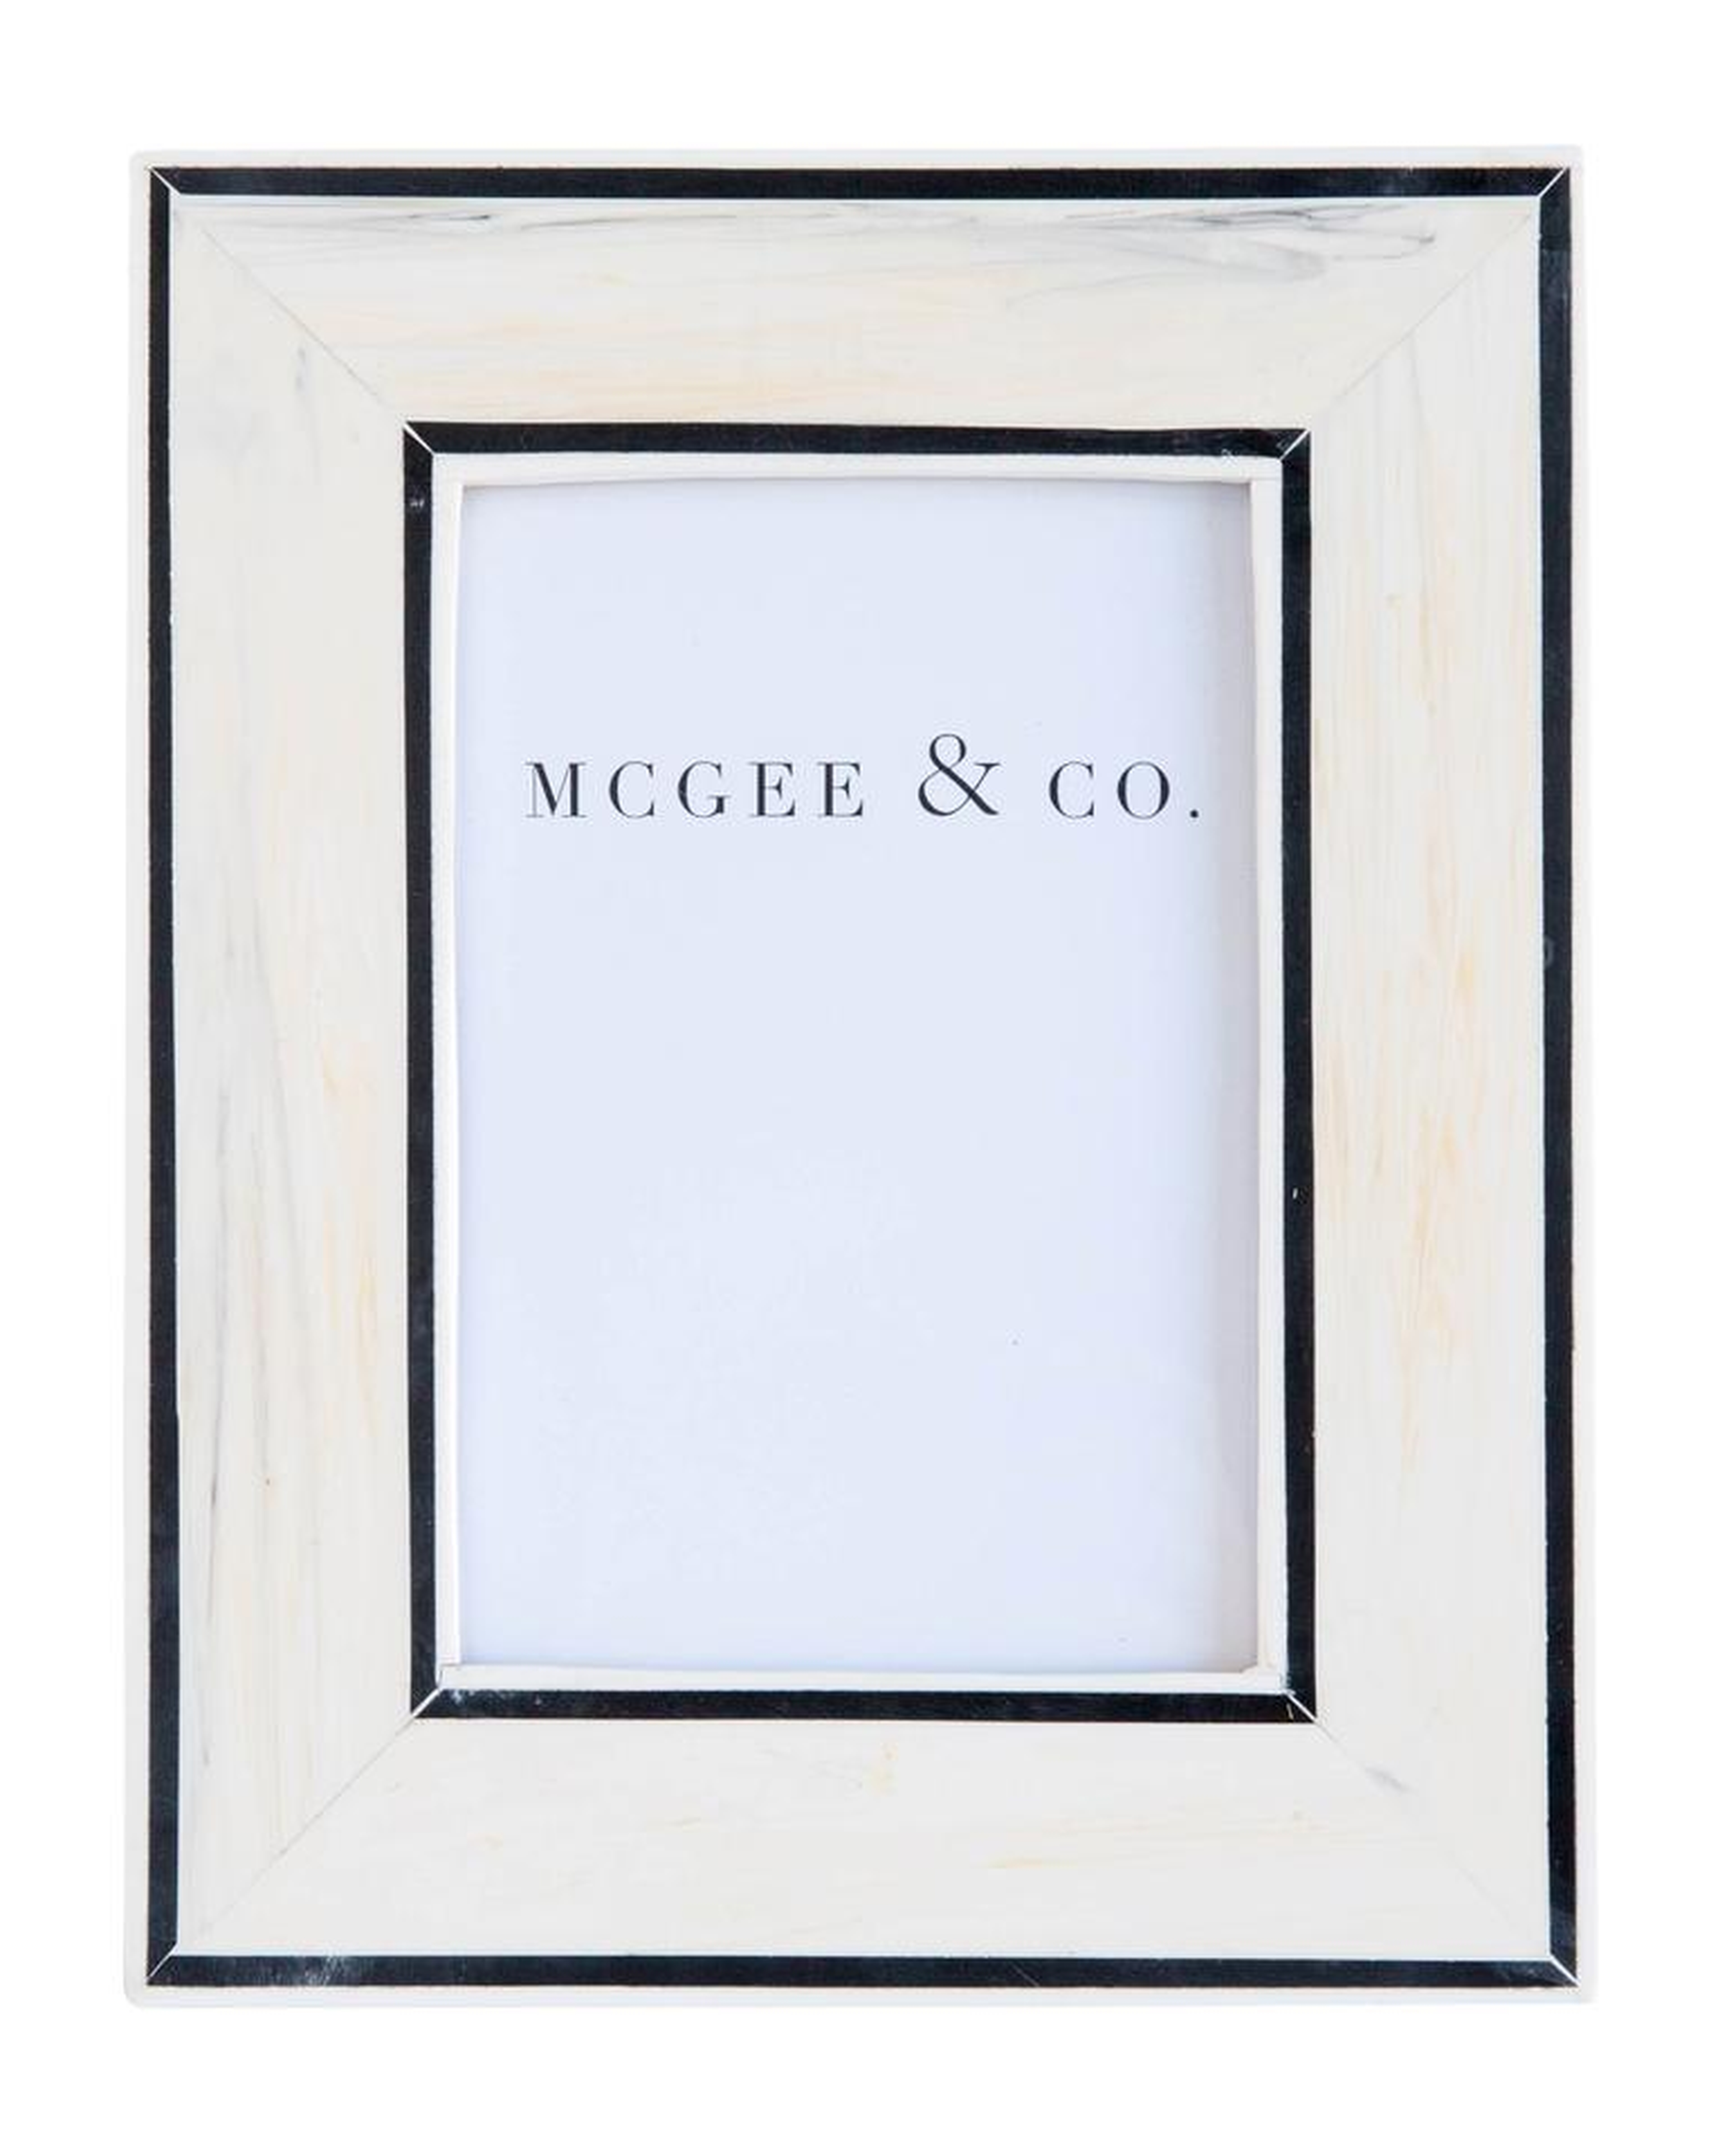 BORDER LINES FRAME - 5" x 7" - McGee & Co.